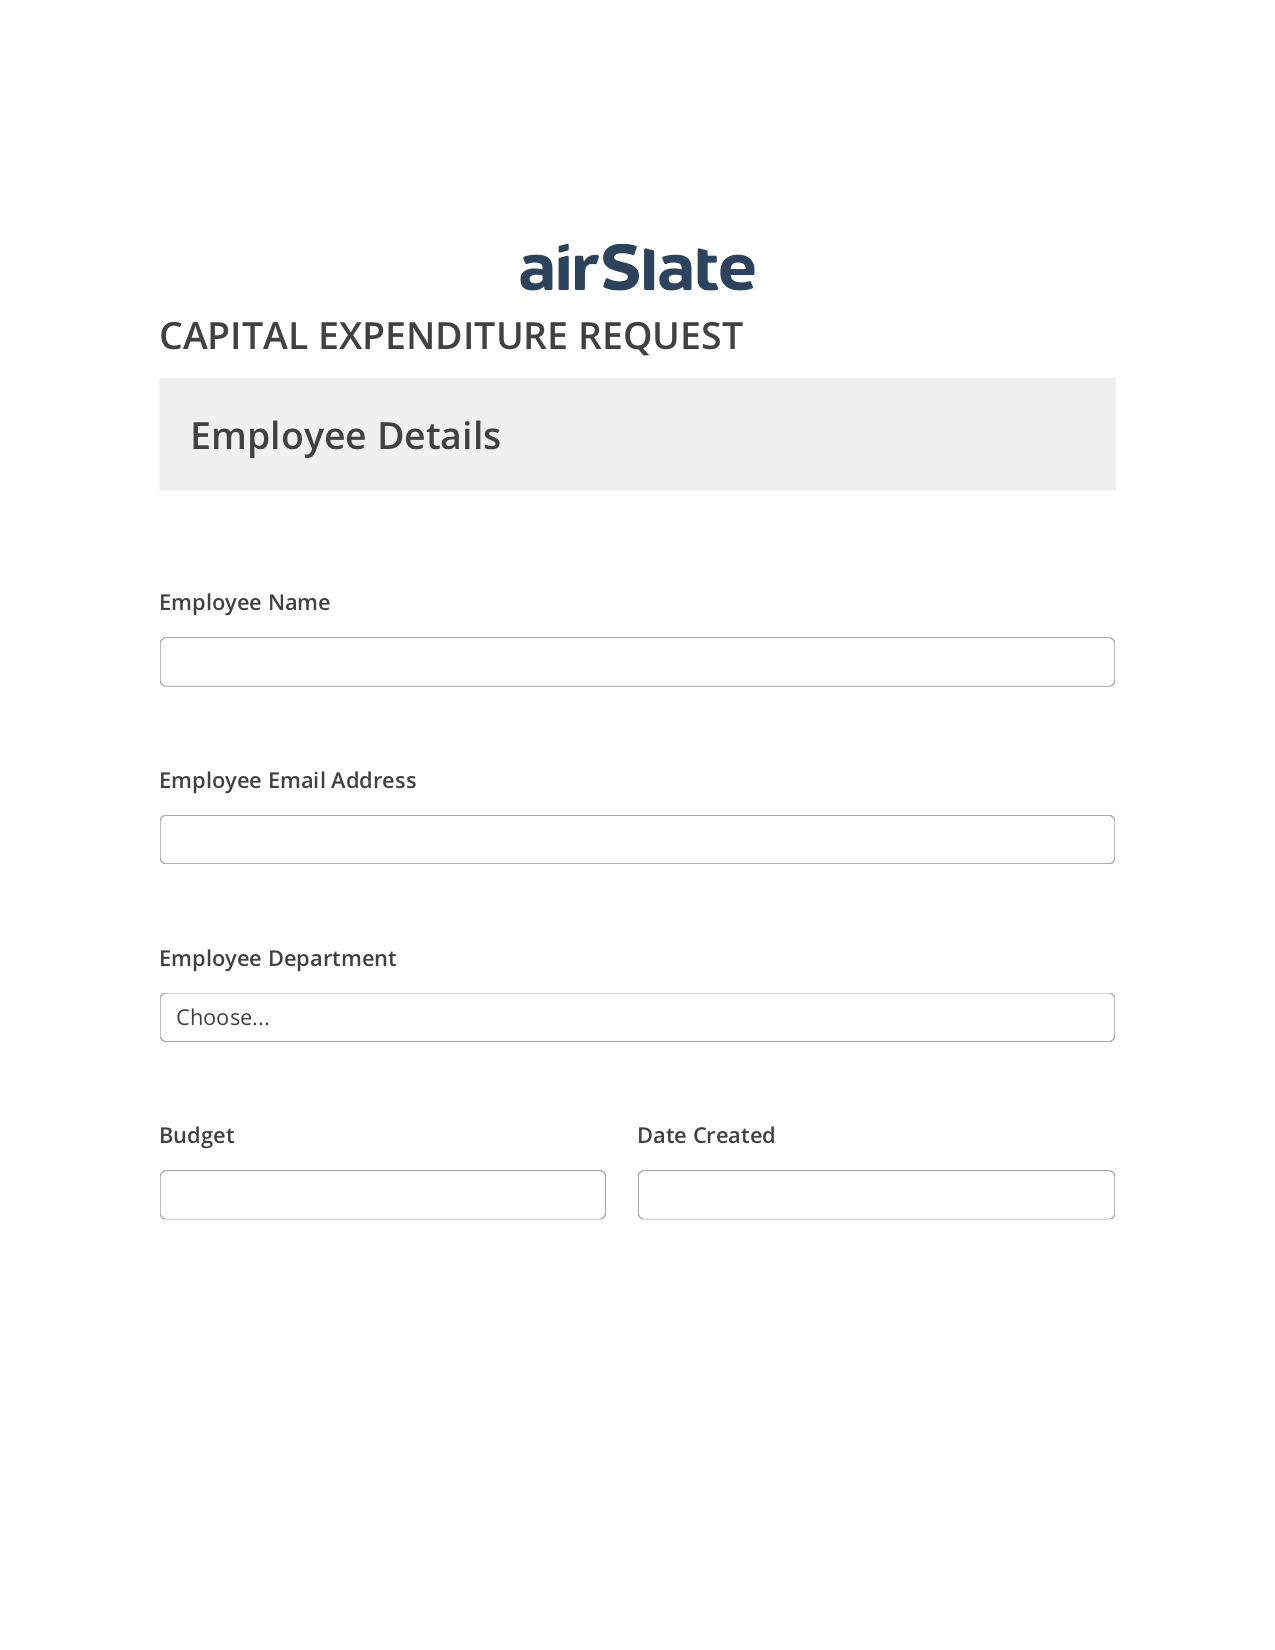 Capital Expenditure Request Approval Workflow Pre-fill from Office 365 Excel Bot, Remove Slate Bot, Export to NetSuite